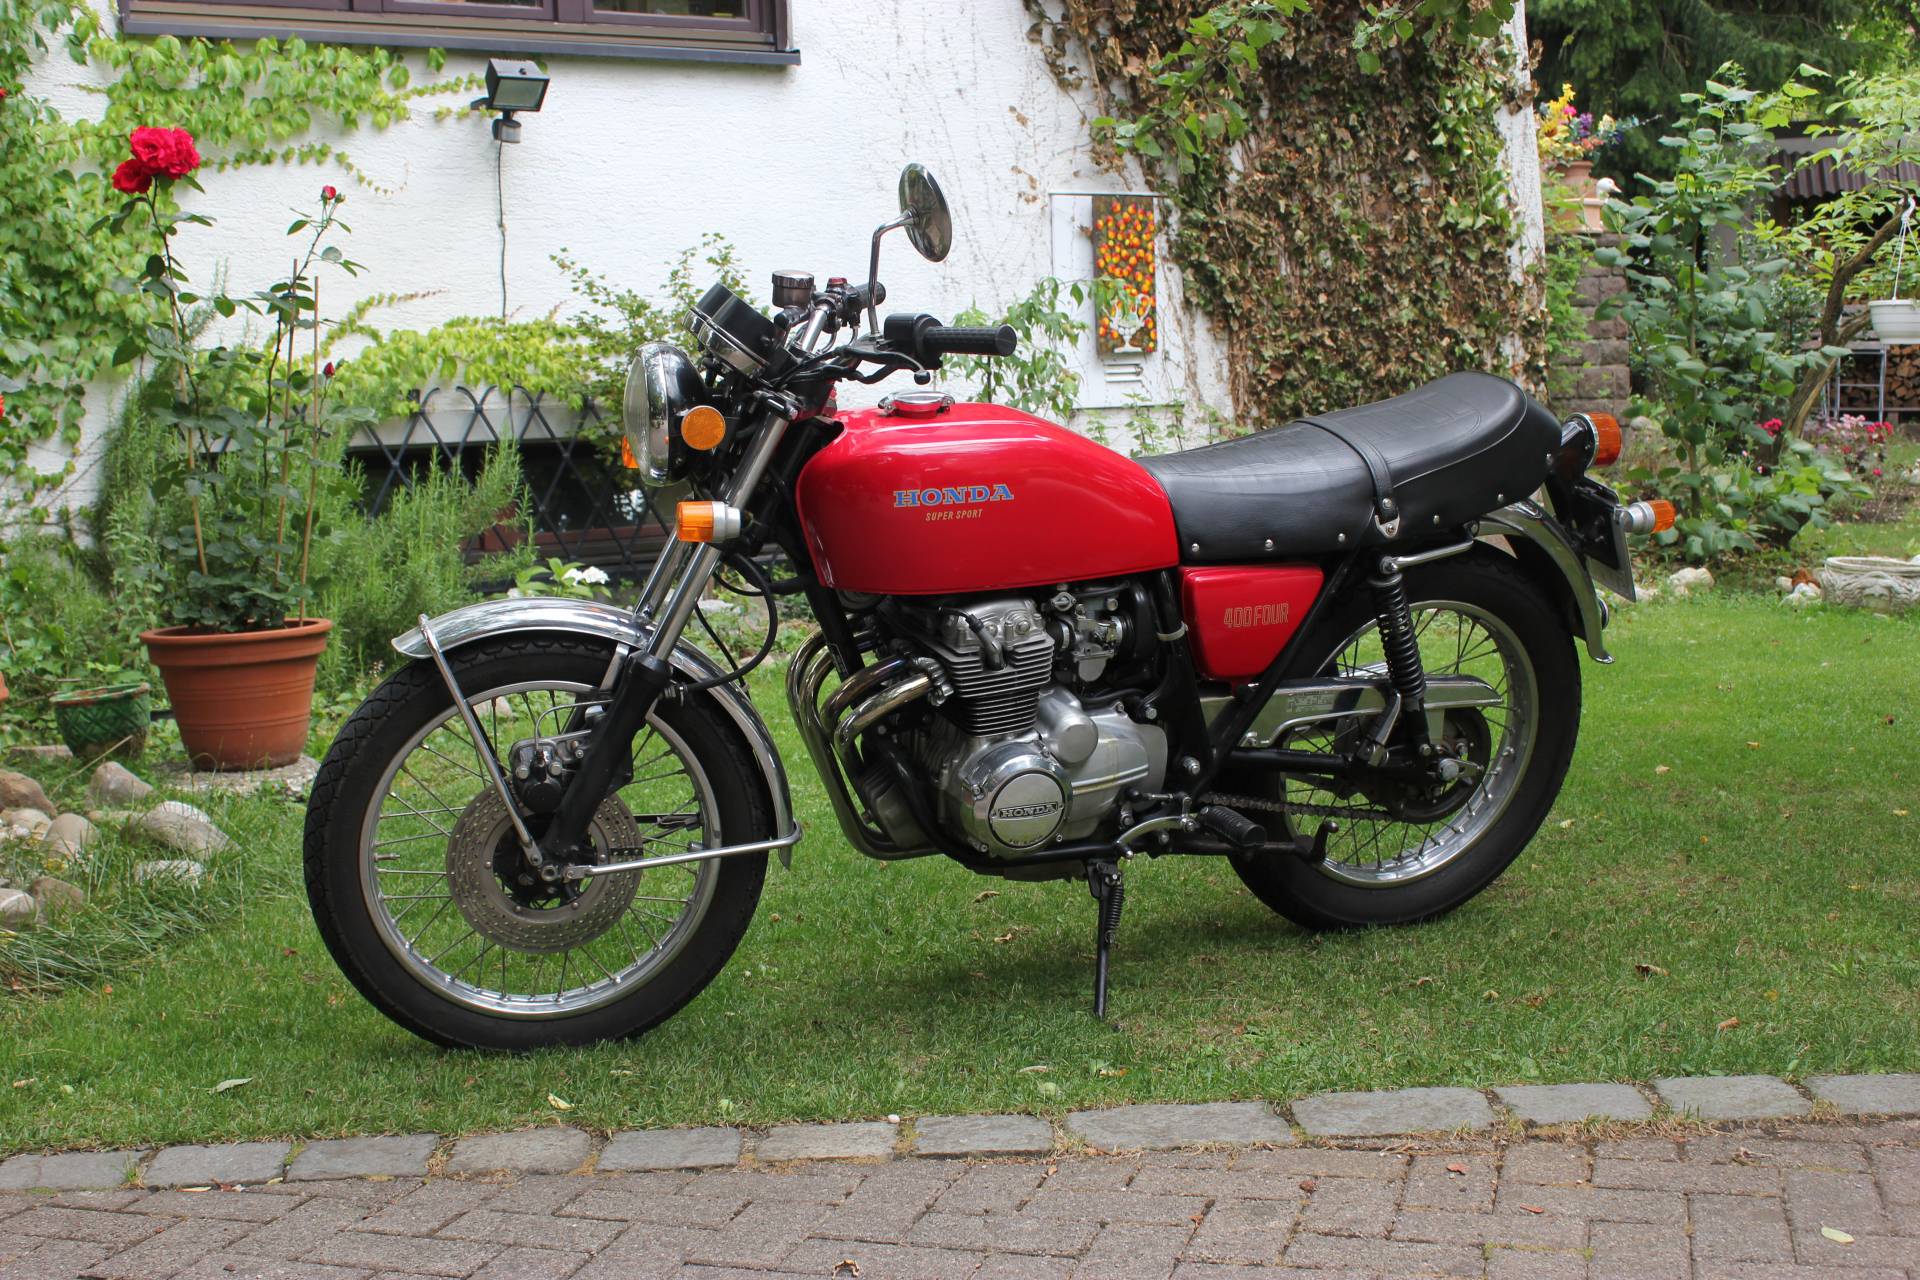 For Sale Honda CB 400 Four (1975) offered for AUD 6,999